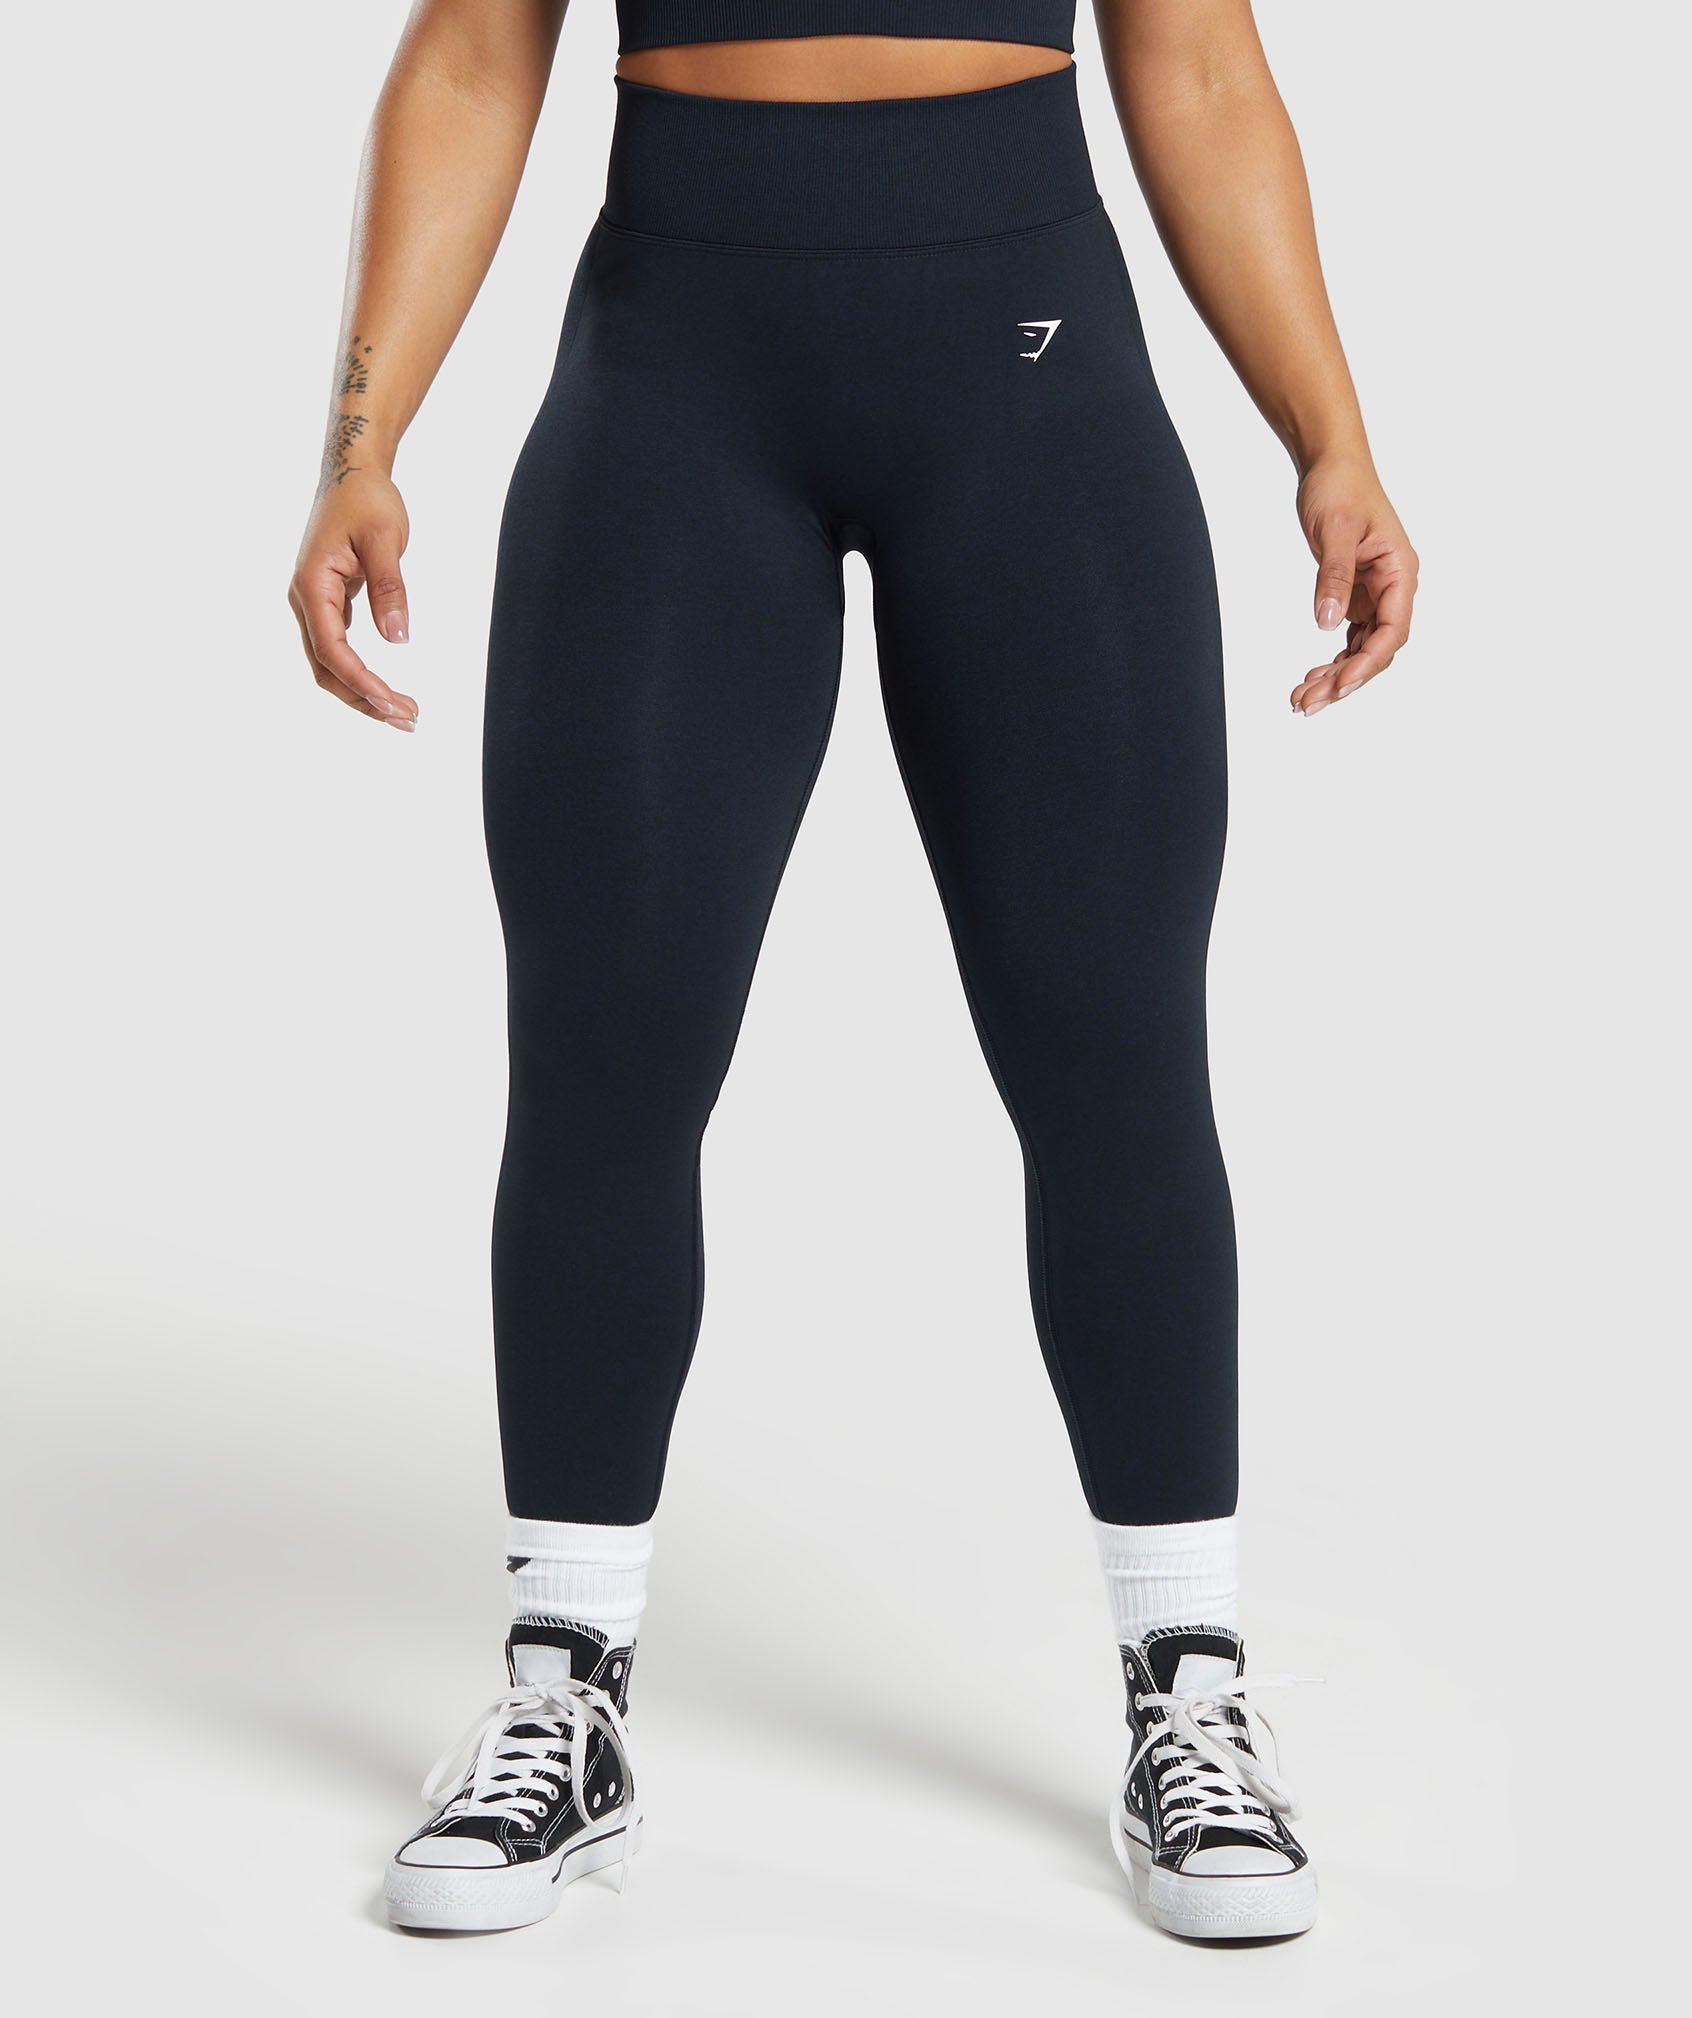 The IG Worthy Gymshark Women's Leggings And Tops We Can't Get Over -  Society19